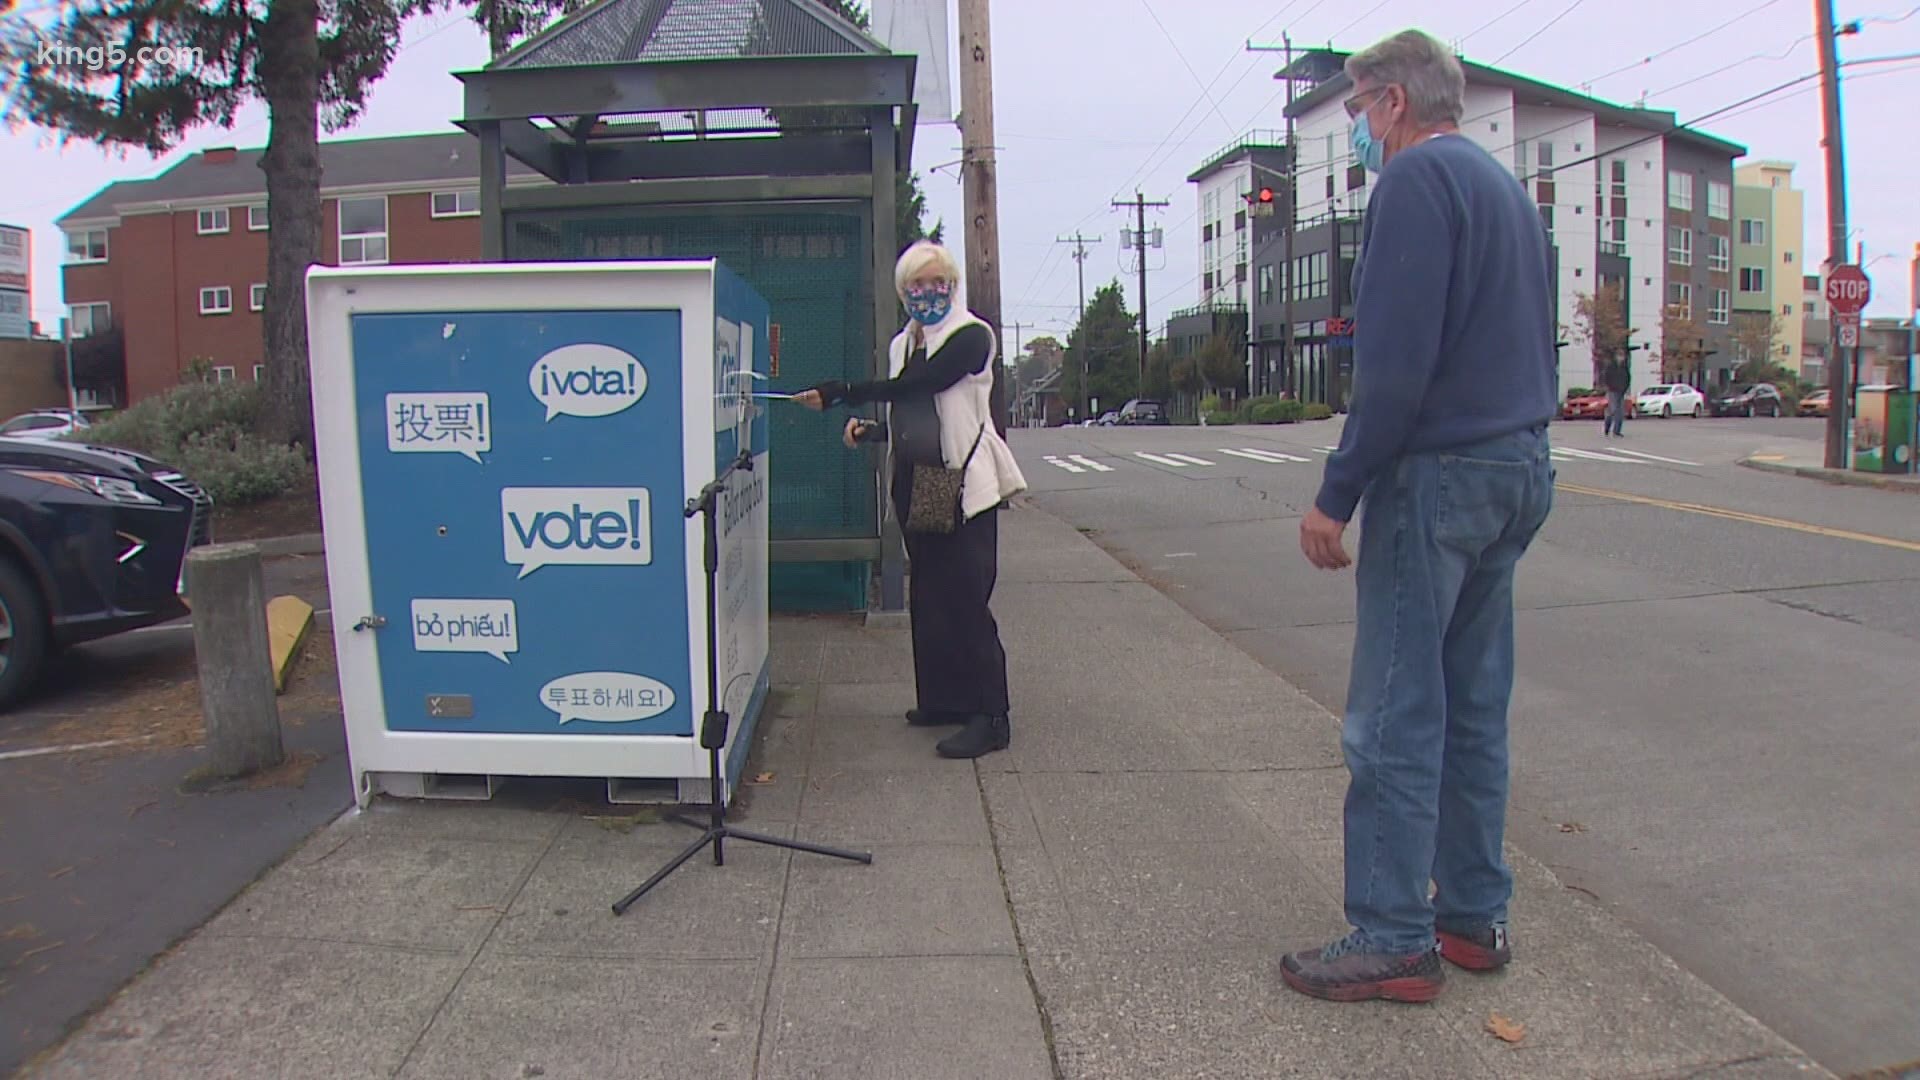 Though Washington allows voting by mail, many rushed to dropboxes this weekend to cast their votes as soon as possible.